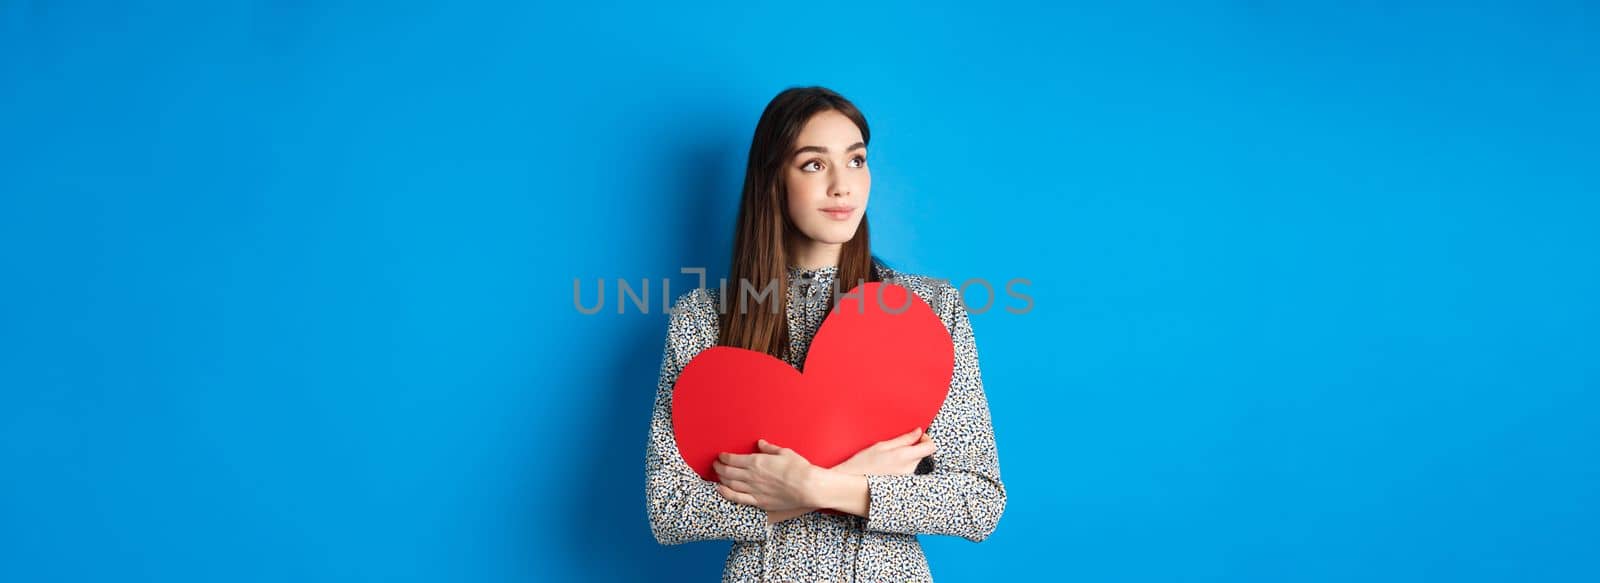 Valentines day. Romantic girl looking dreamy at upper left corner and smiling, holding big red heart cutout, standing on blue background.